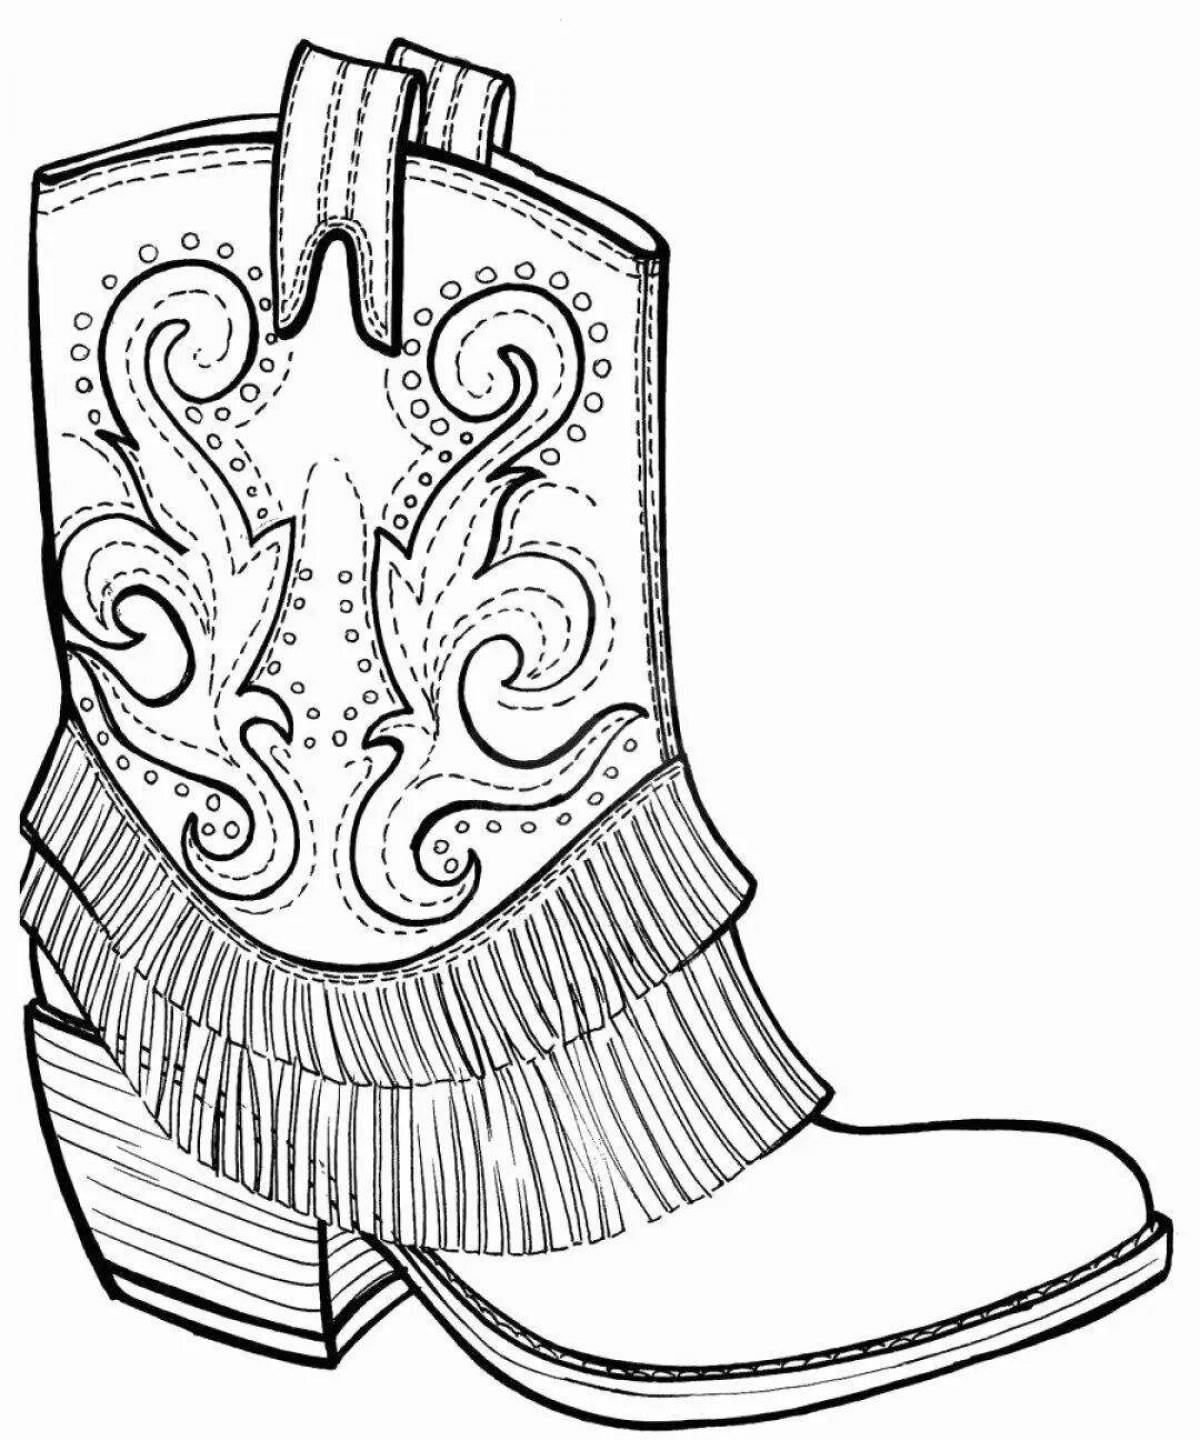 Coloring radiant tatar boot